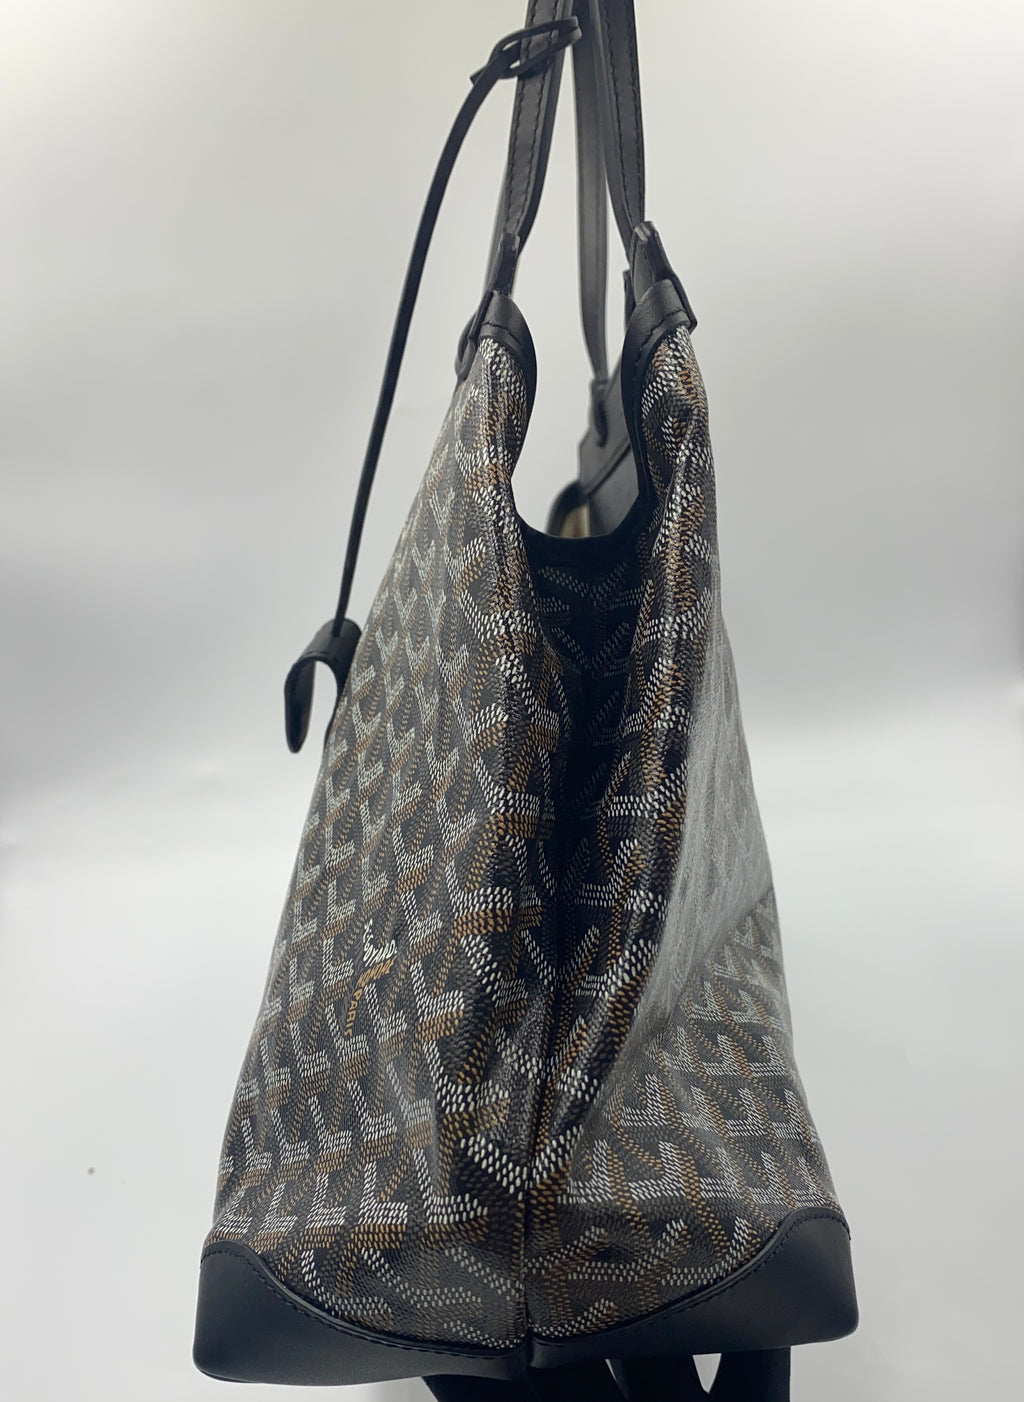 Goyard Bellechasse MM tote bag in canvas print with black leather